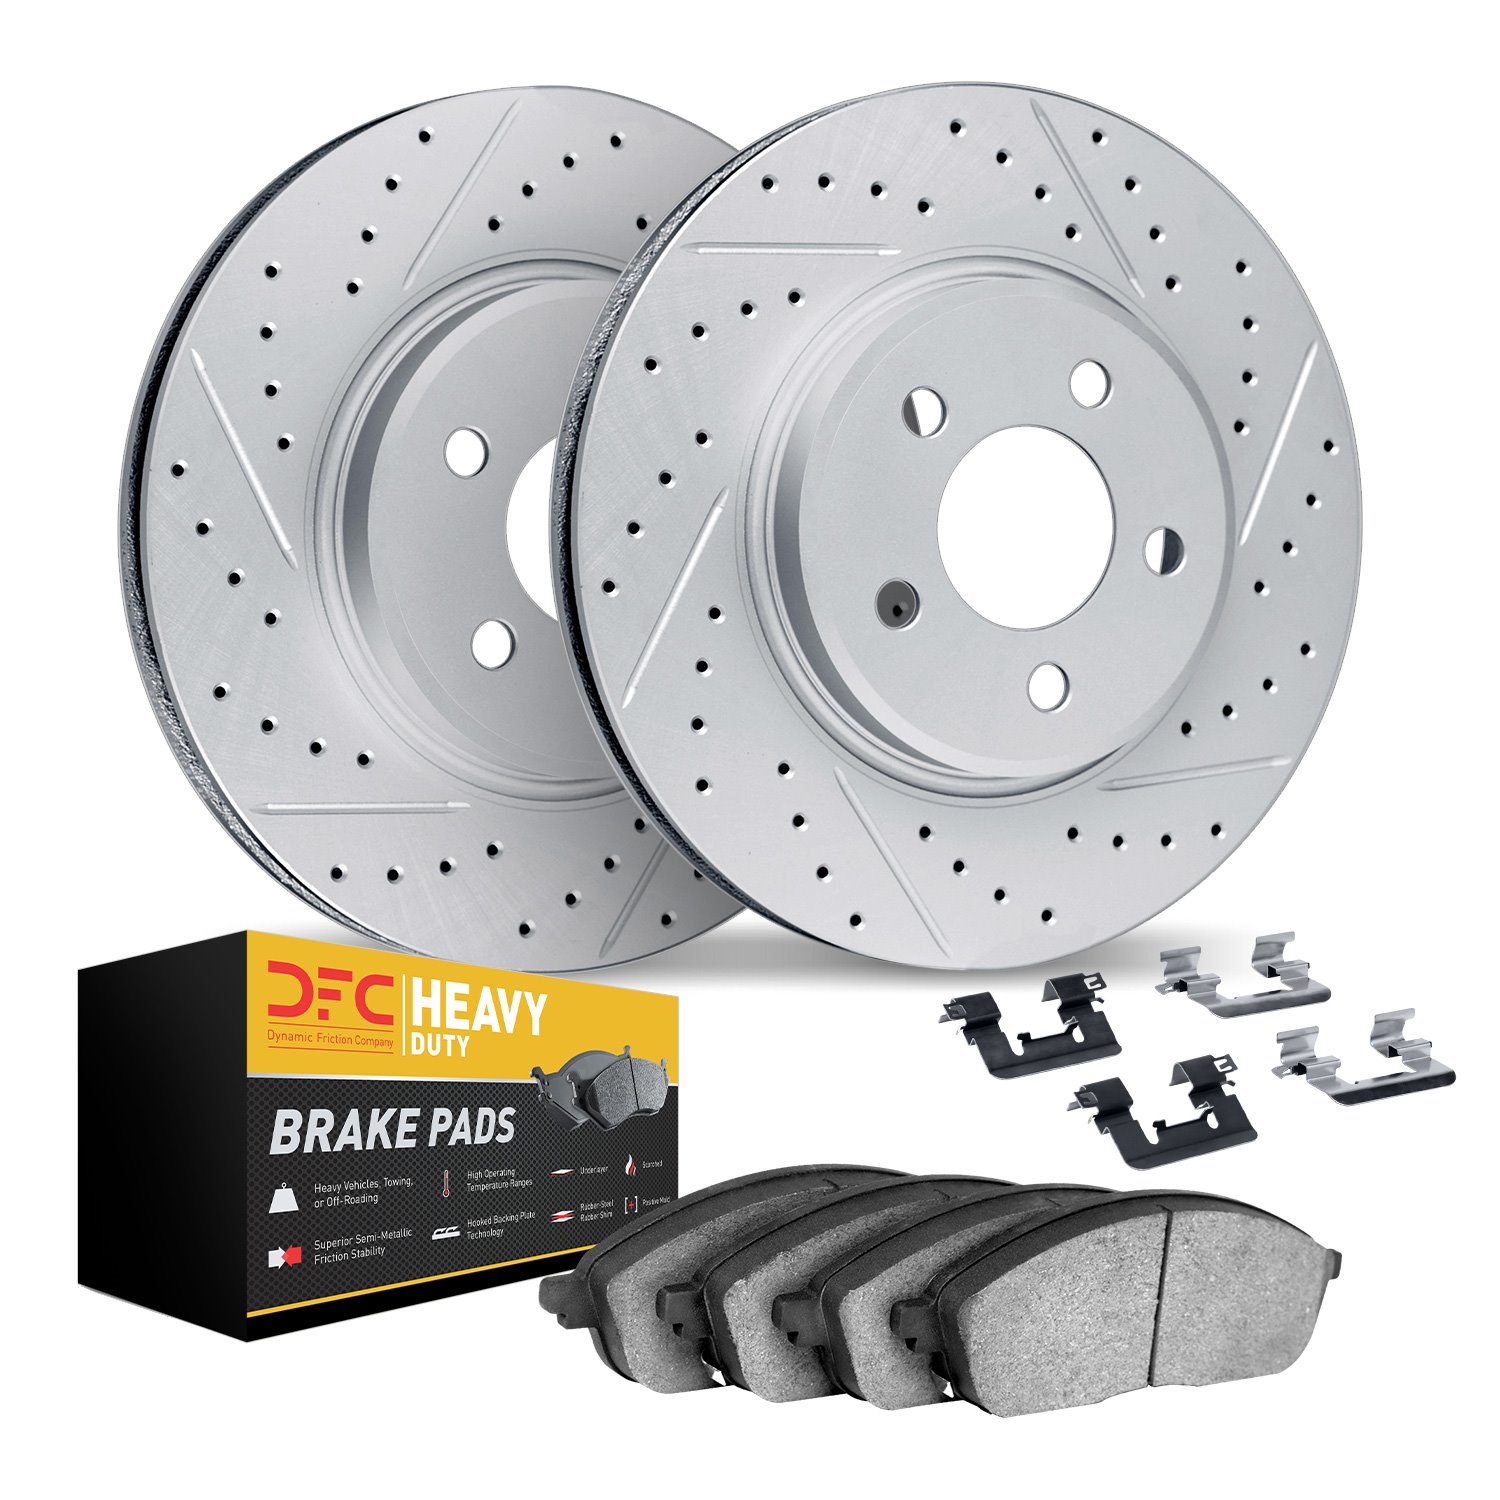 2212-99119 Geoperformance Drilled/Slotted Rotors w/Heavy-Duty Pads Kit & Hardware, 2001-2005 Ford/Lincoln/Mercury/Mazda, Positio